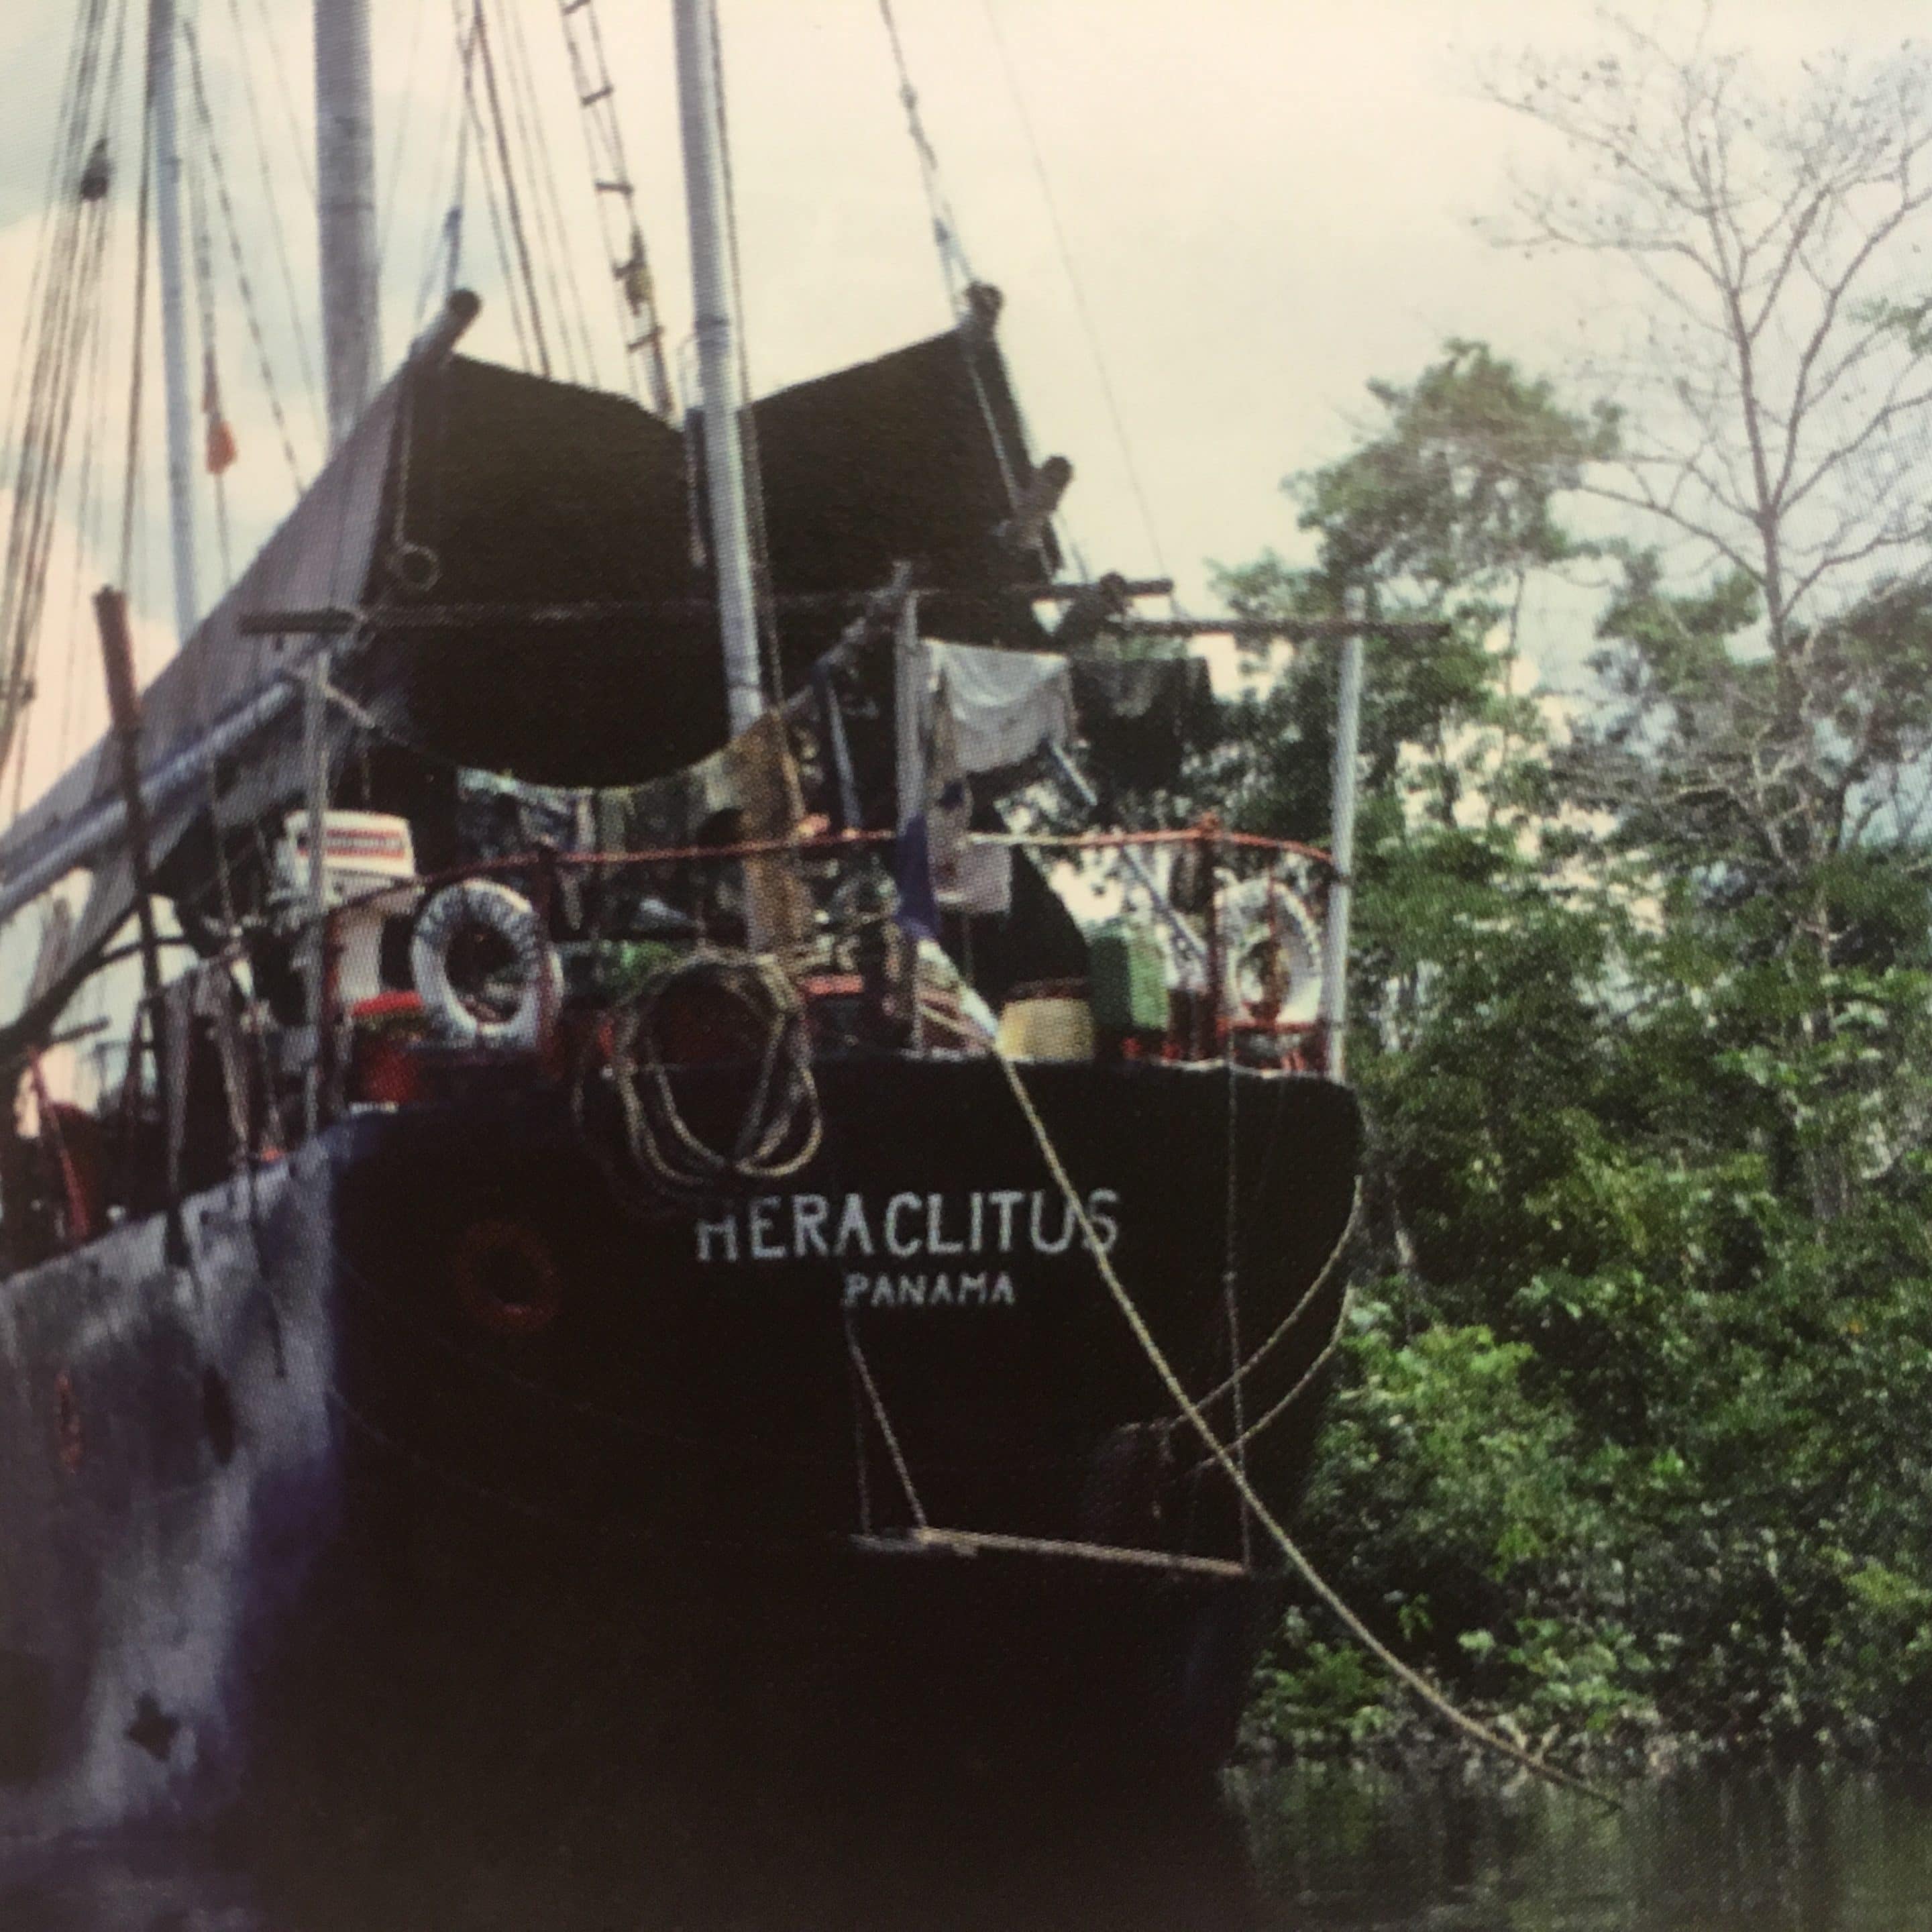 Sailing the Amazon River on RV Heraclitus, a ship that Allen helped to design and build